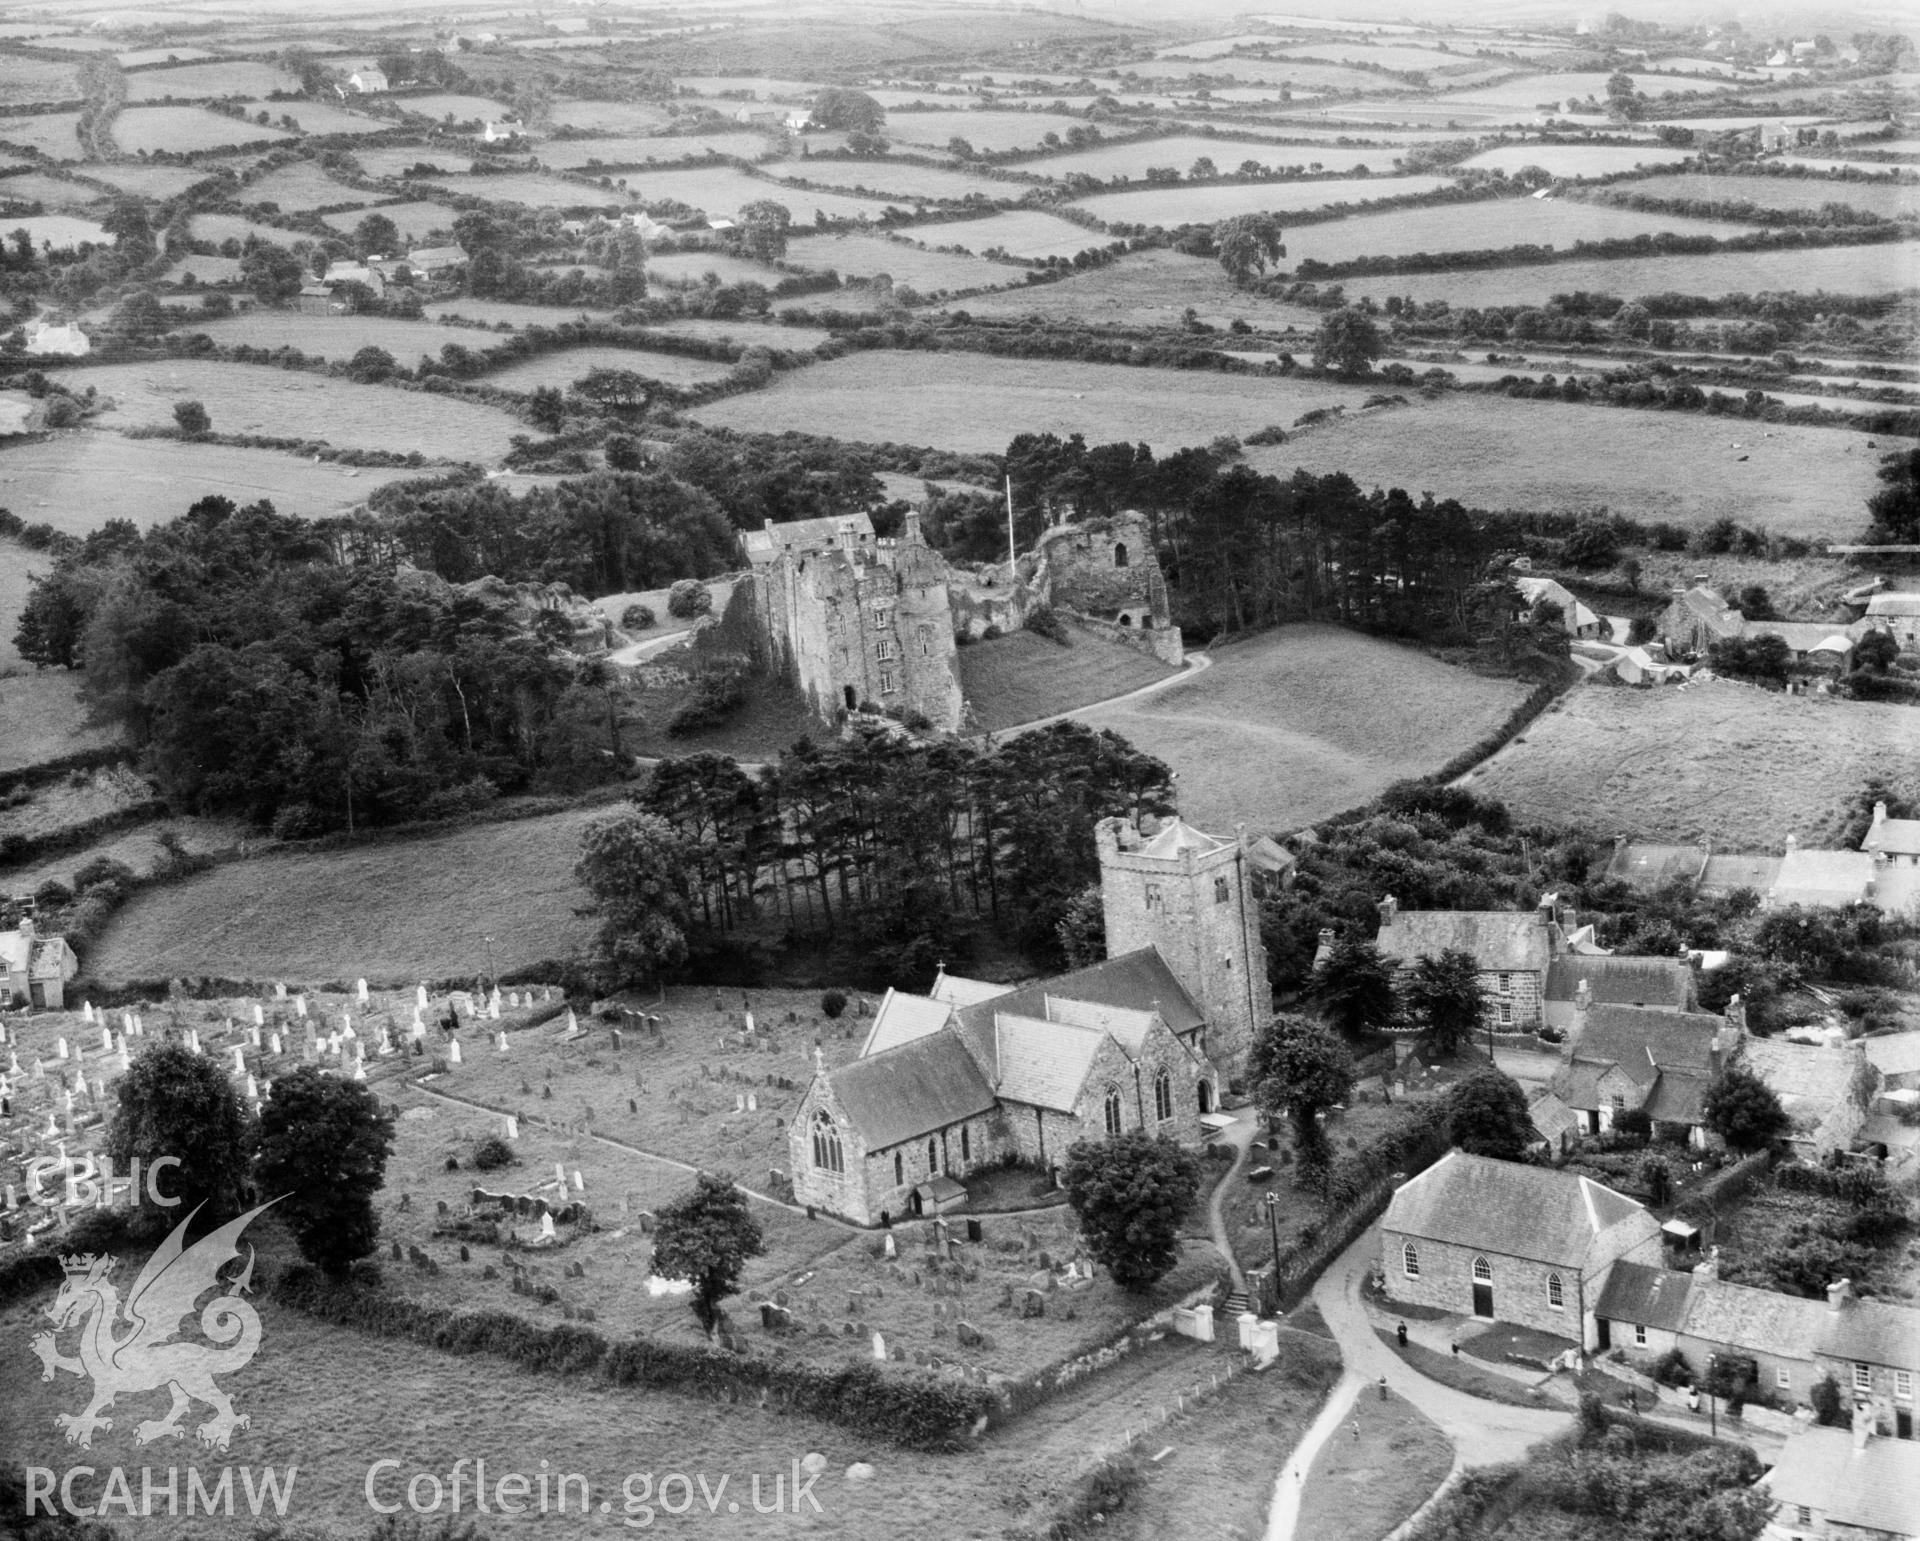 View of Newport, Pembrokeshire, showing church and castle, oblique aerial view. 5?x4? black and white glass plate negative.